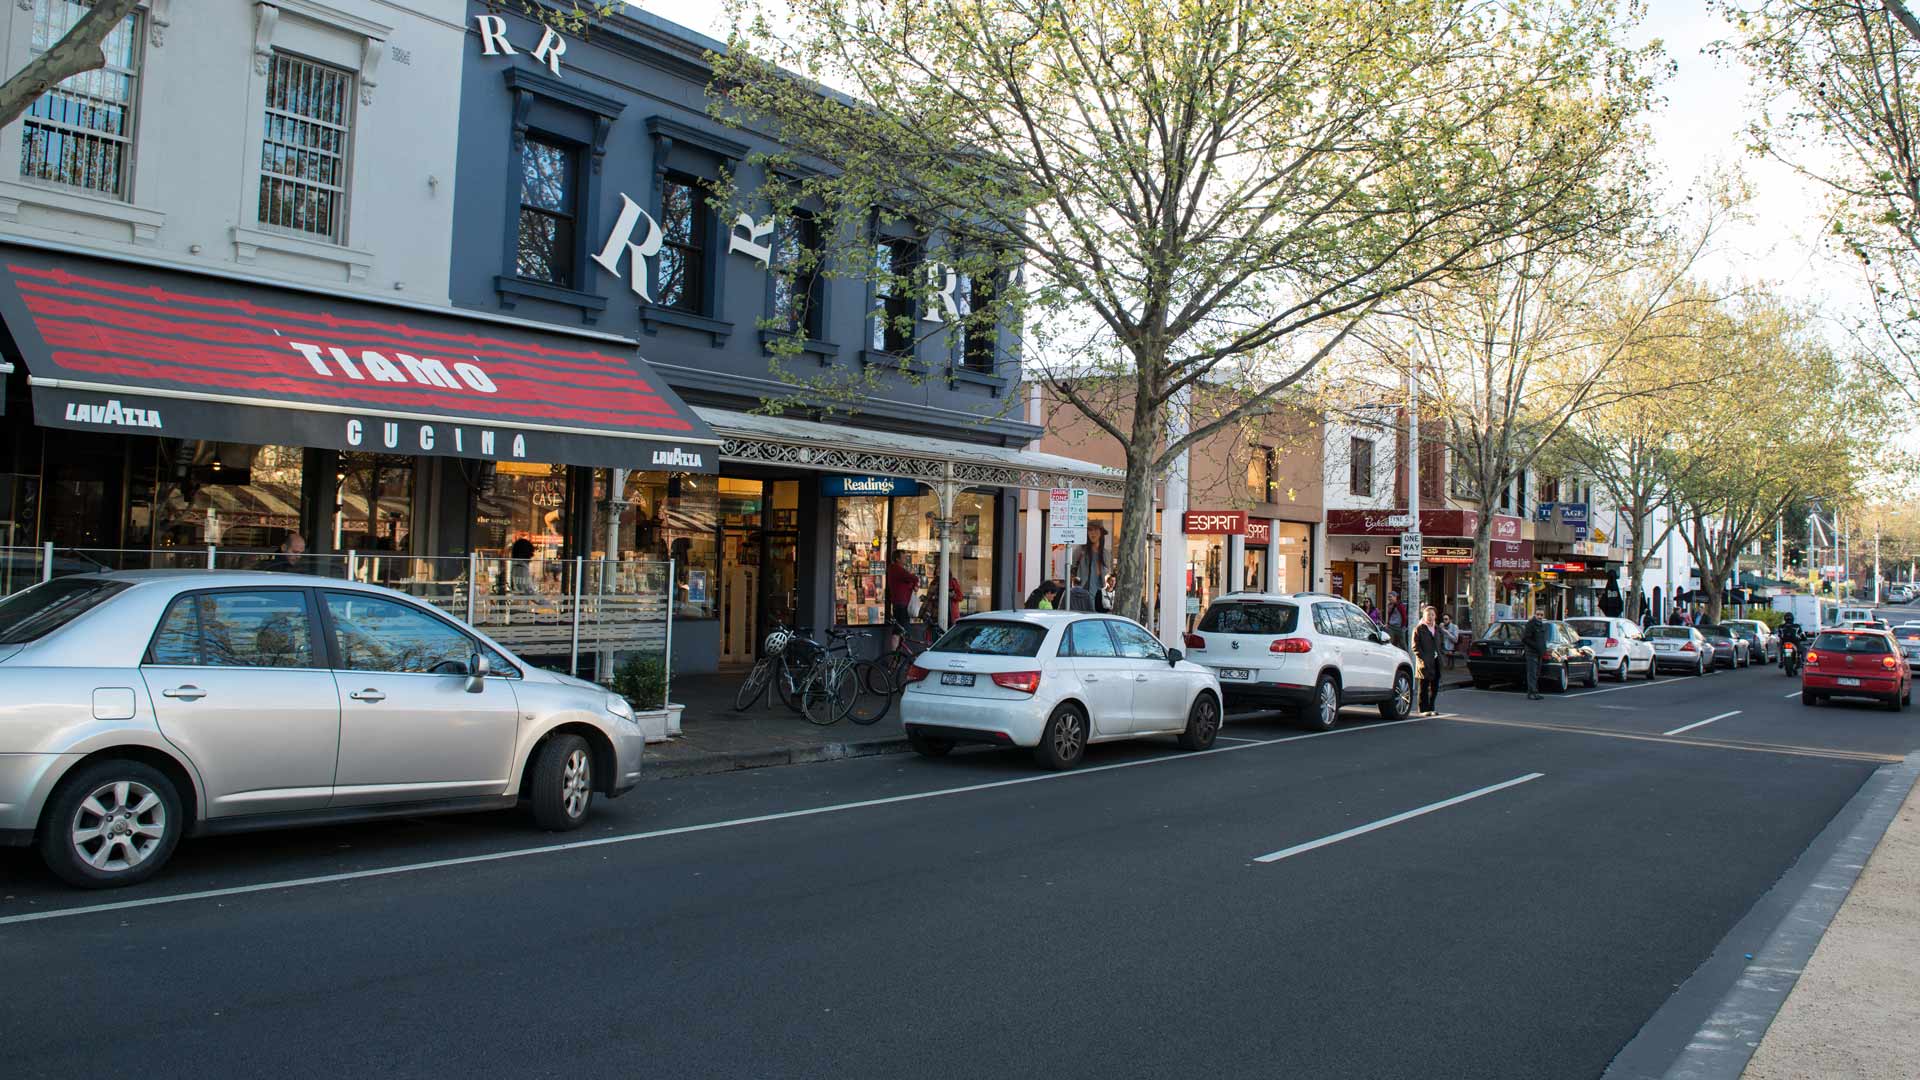 Lygon Street Could Have Its Parking Bays Switched For Bike Lanes